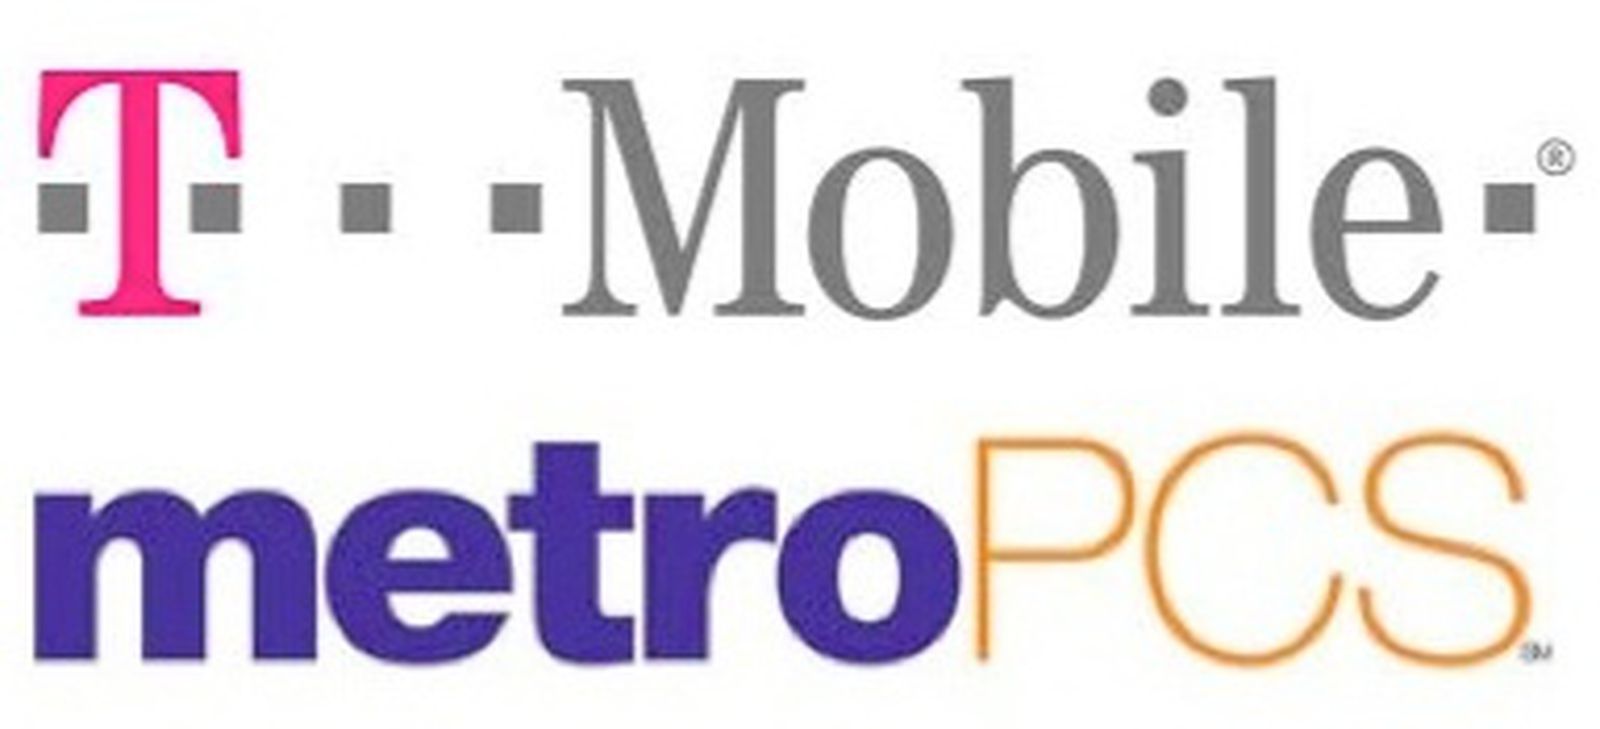 iPhone on MetroPCS Not Imminent After T-Mobile Merger - MacRumors